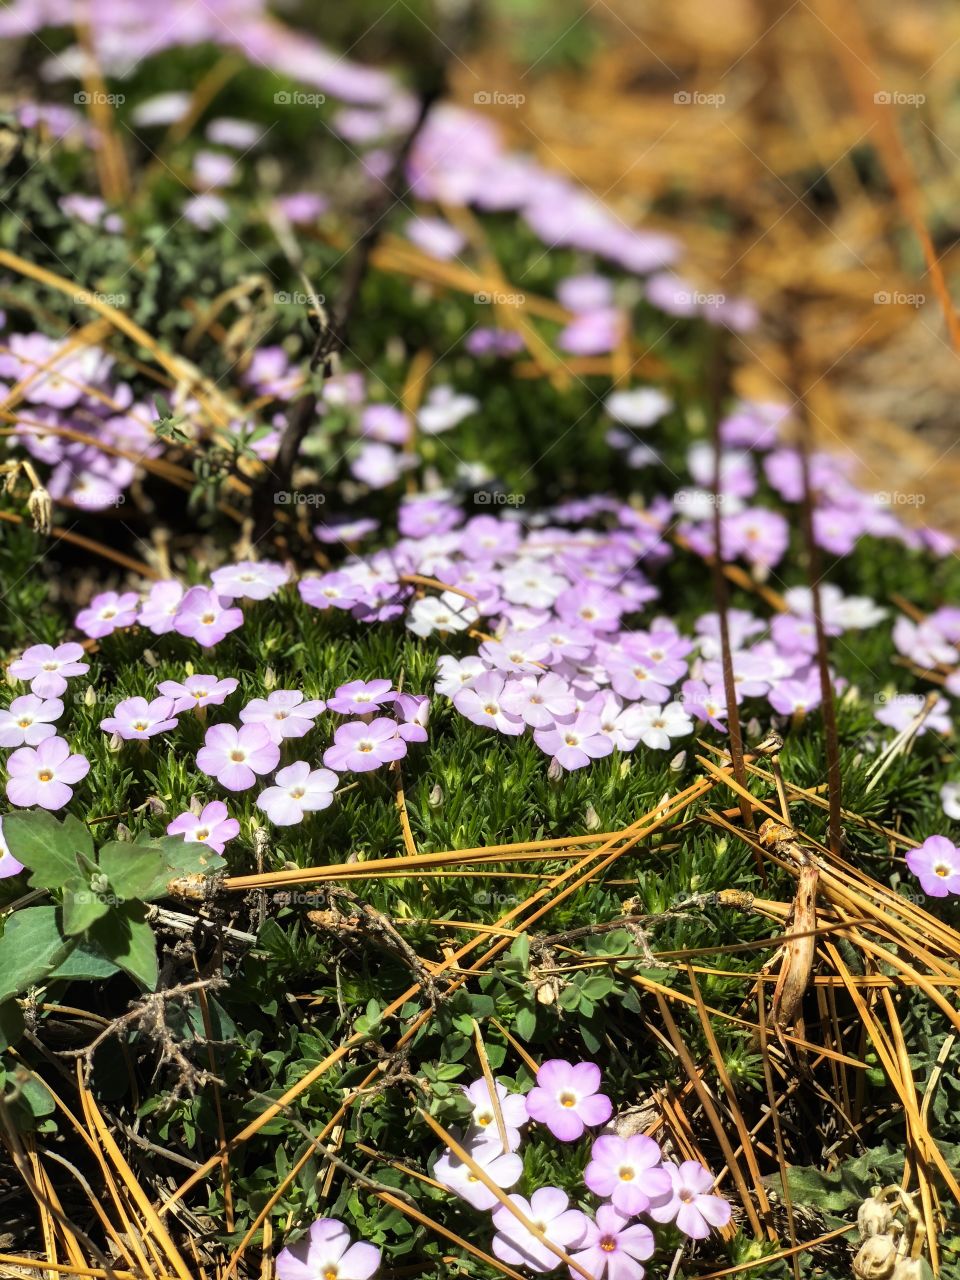 Little white and purple flowers on the forest